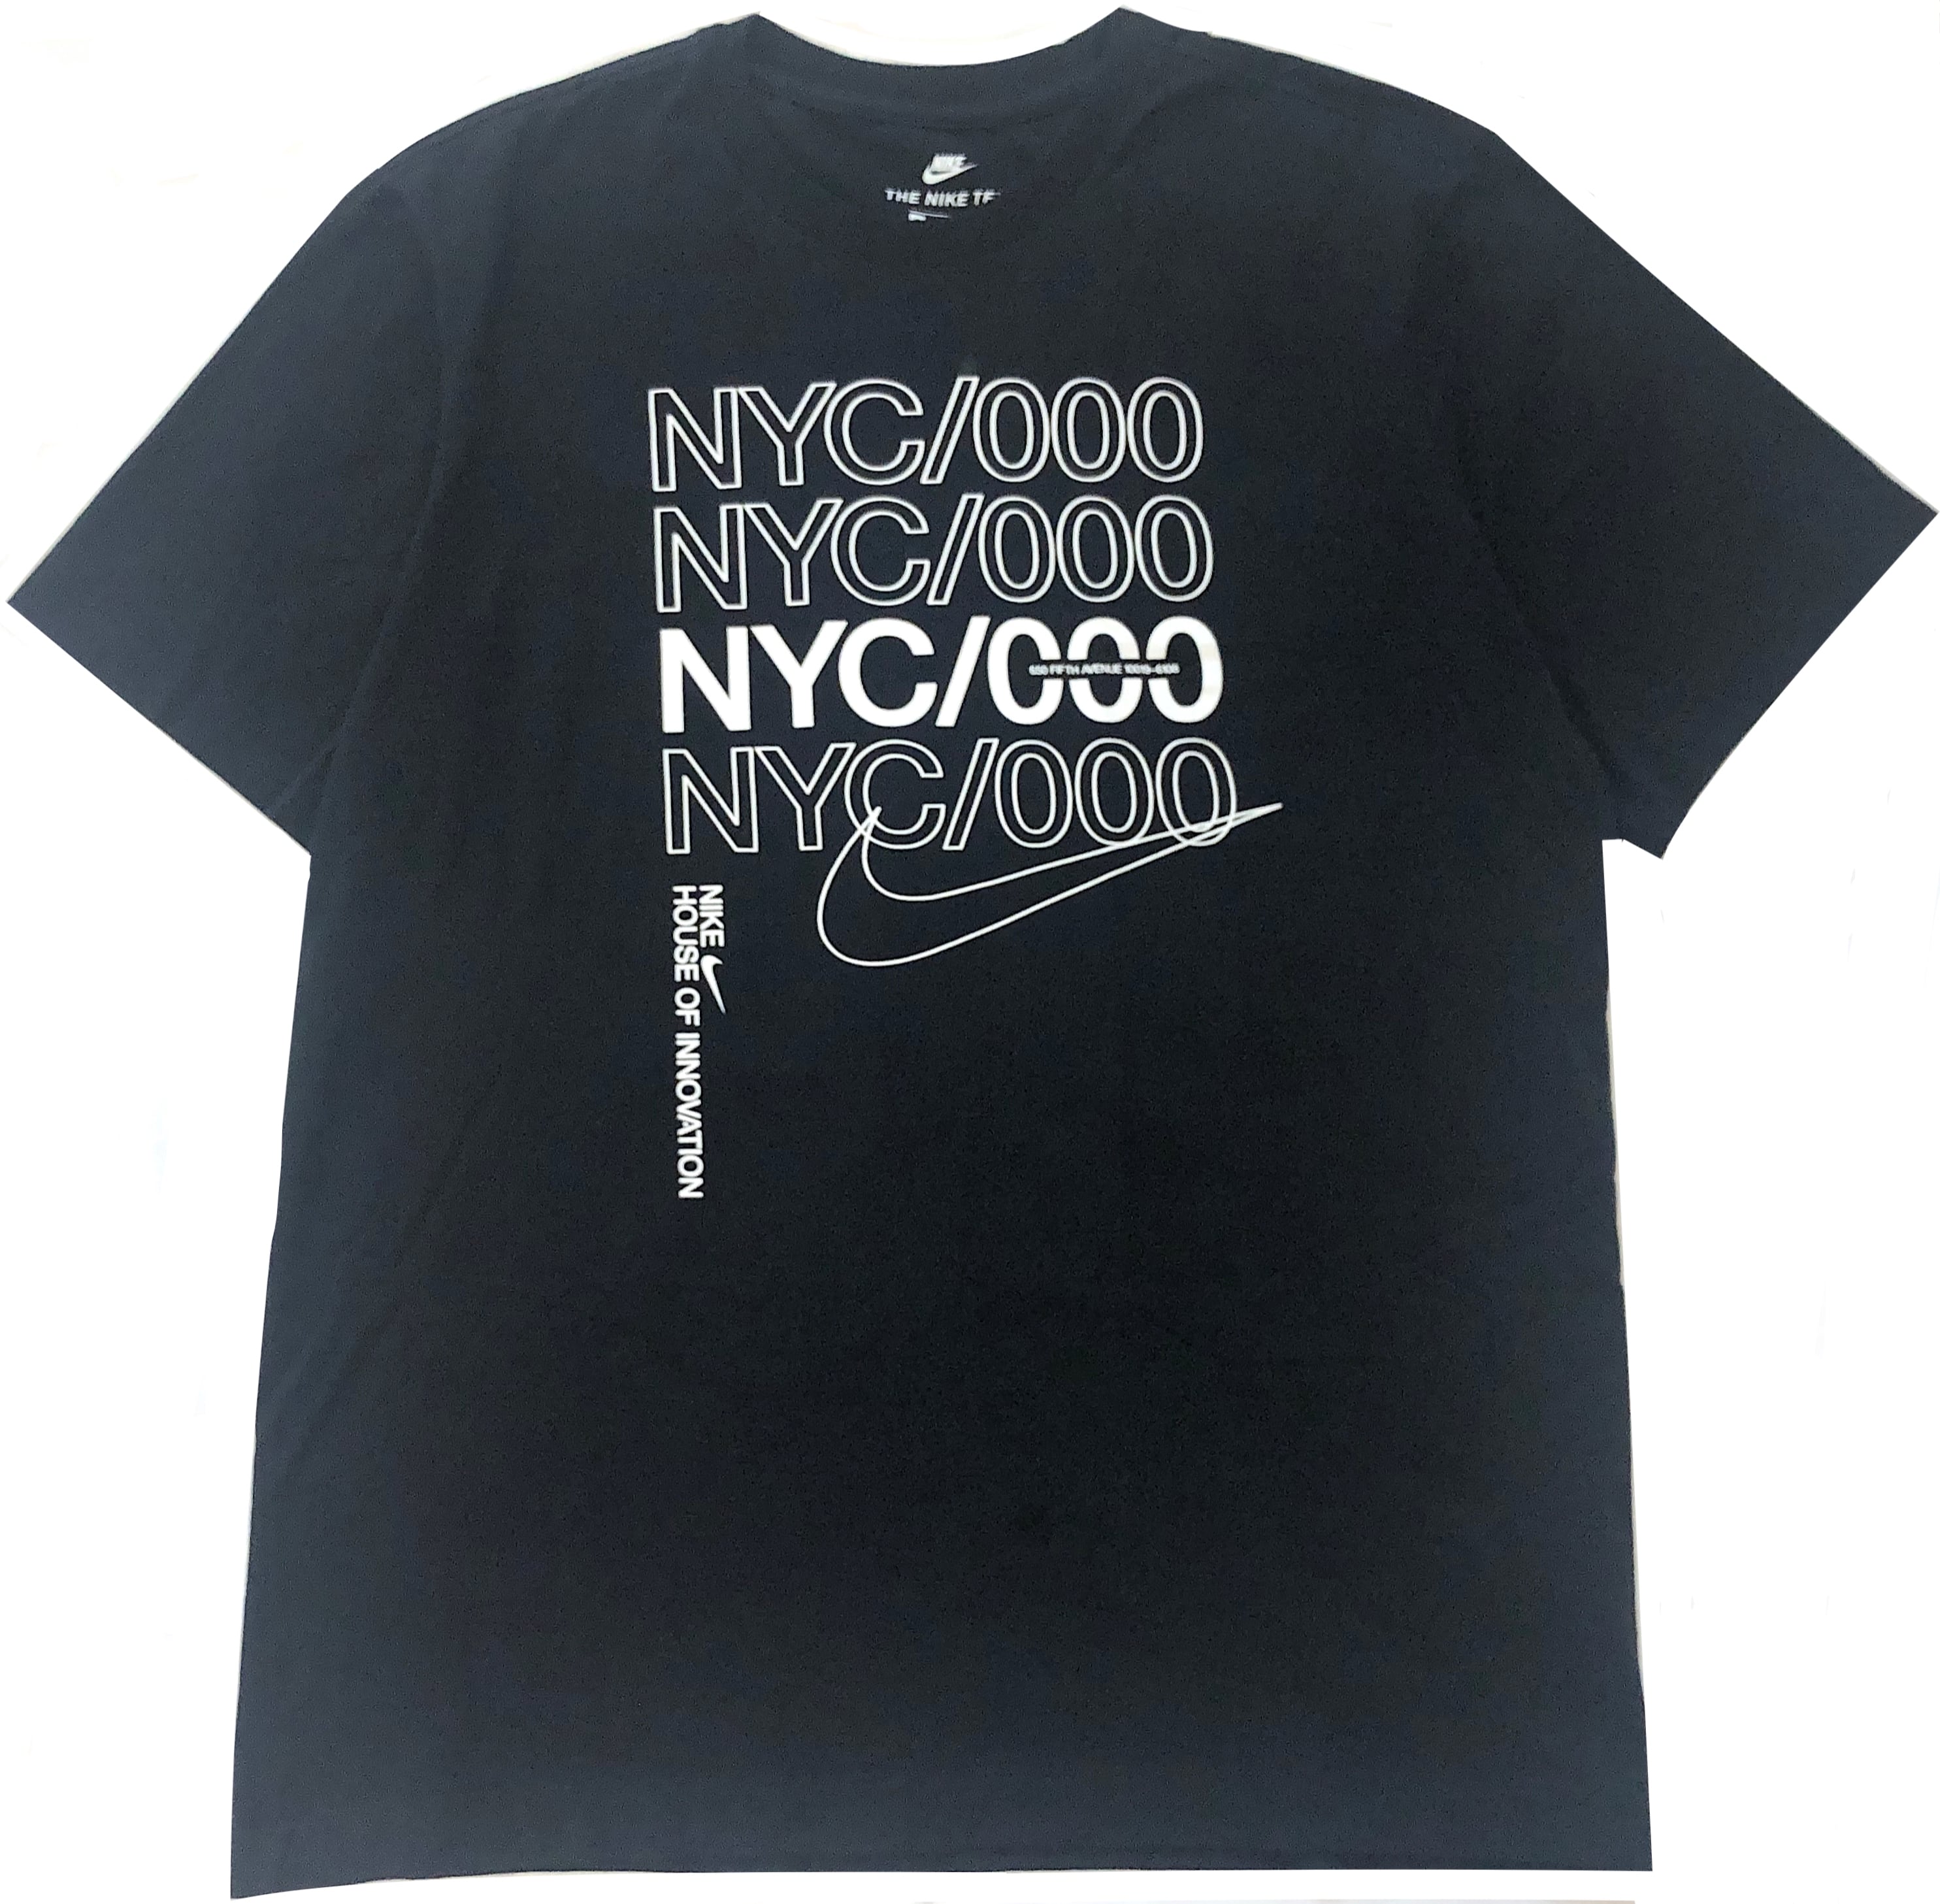 Nike House Of Innovation NYC/000 Fifth Avenue Limited - Tee ...